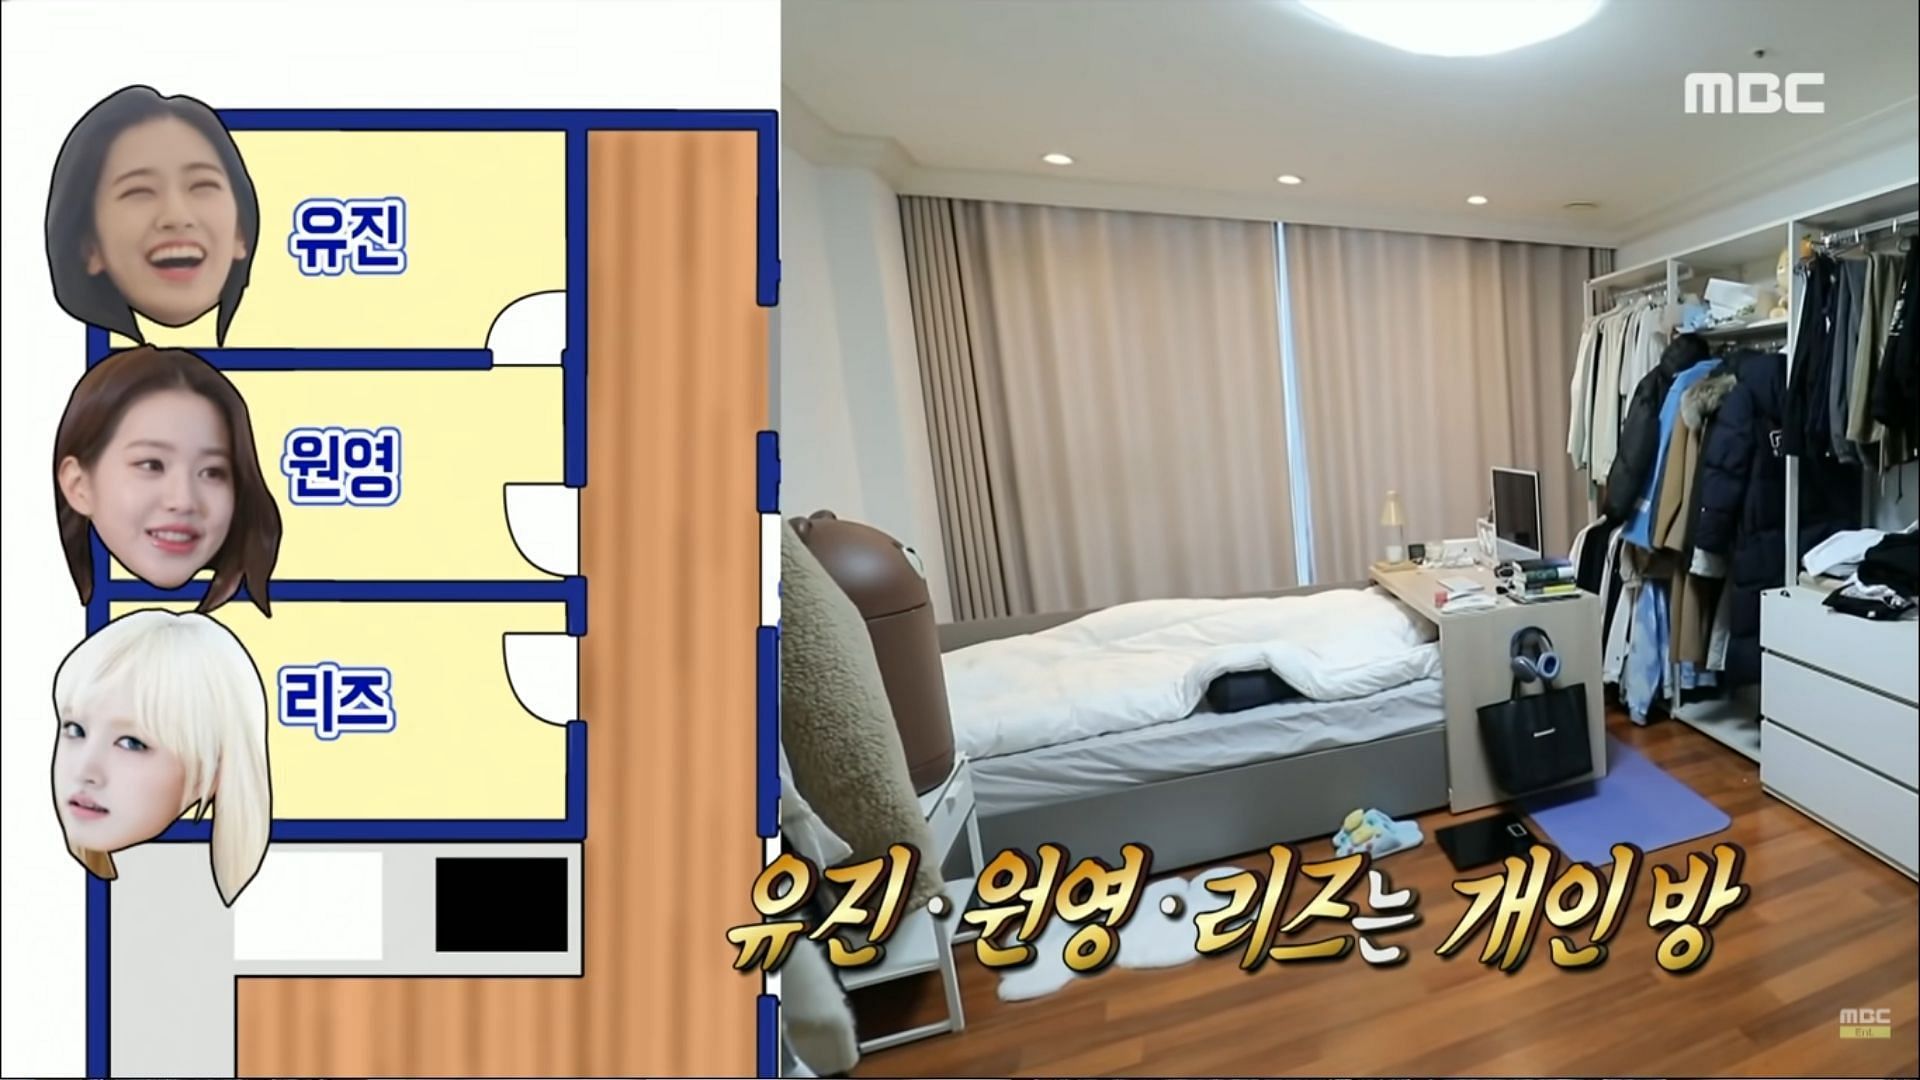 Individual rooms in the dorm (Image via MBC Entertainment/YouTube)